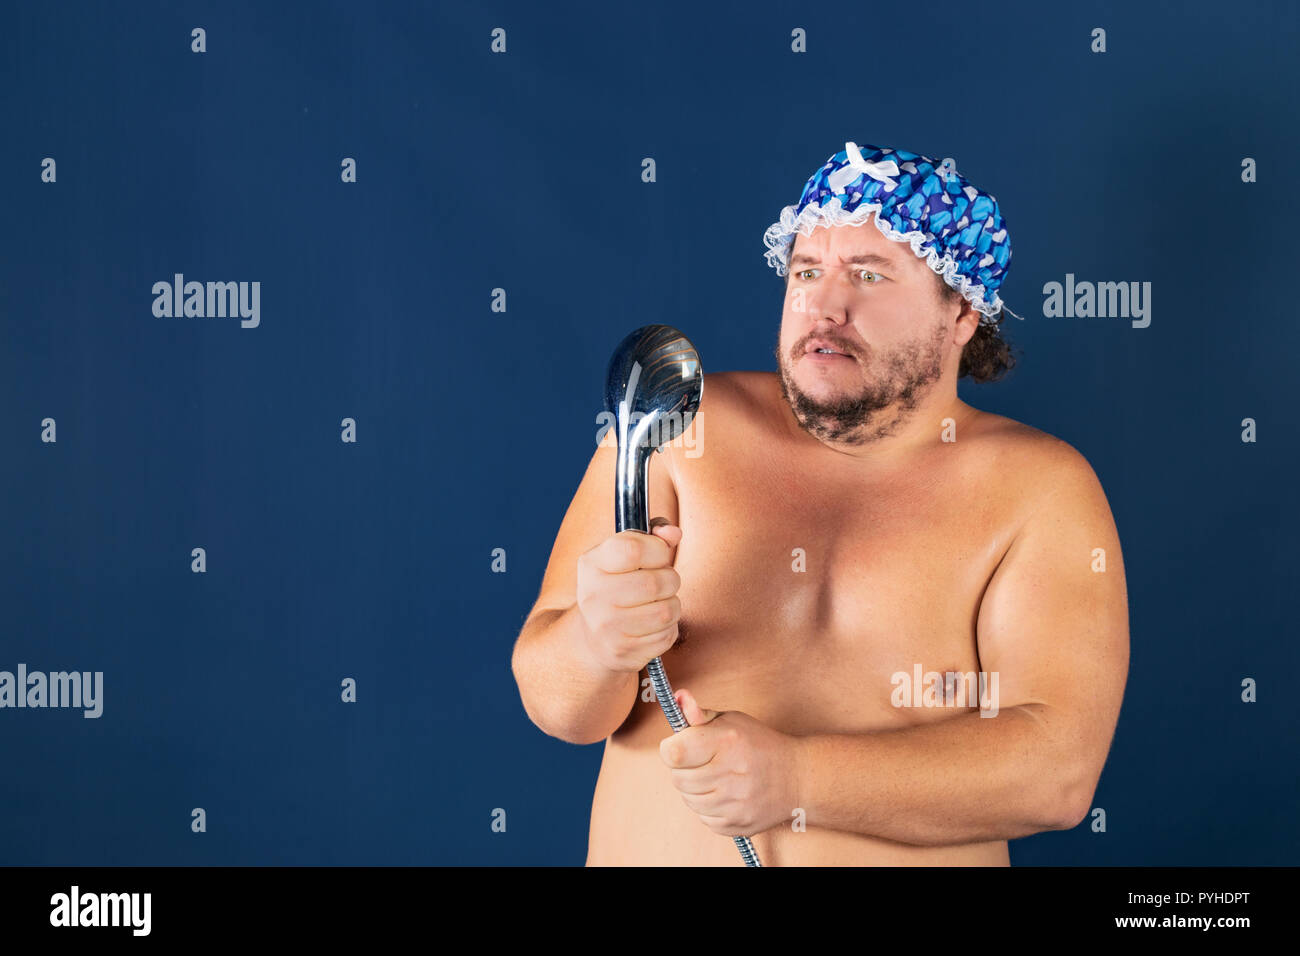 Funny fat man in blue cap sing in the shower. Fun and cleanliness Stock Photo